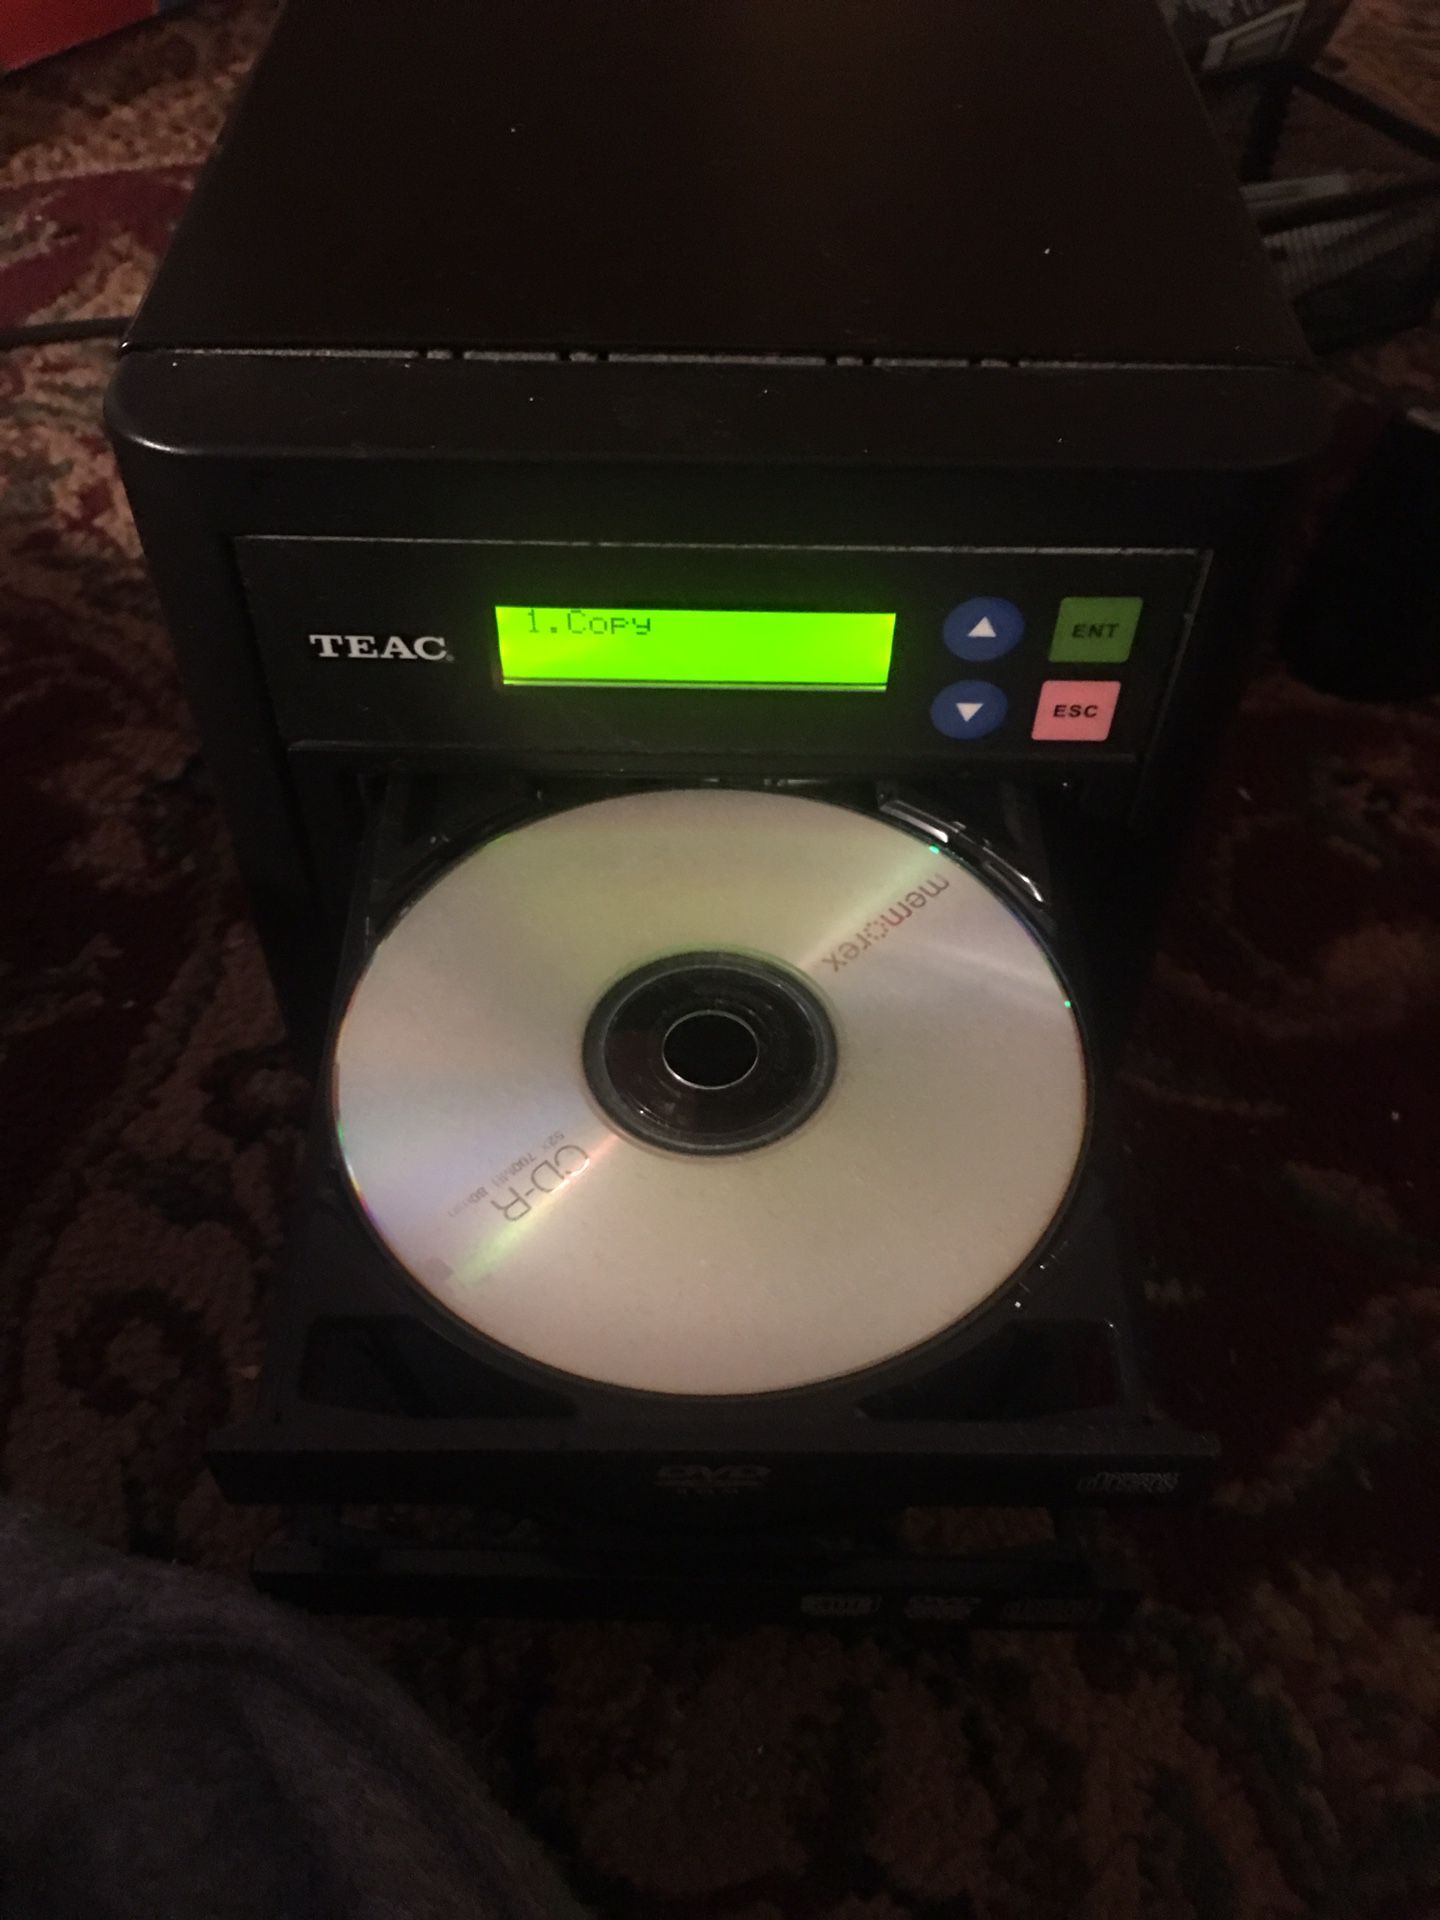 DVD/ CD COPY MACHINE , excellent condition, $125. you can’t beat that price!